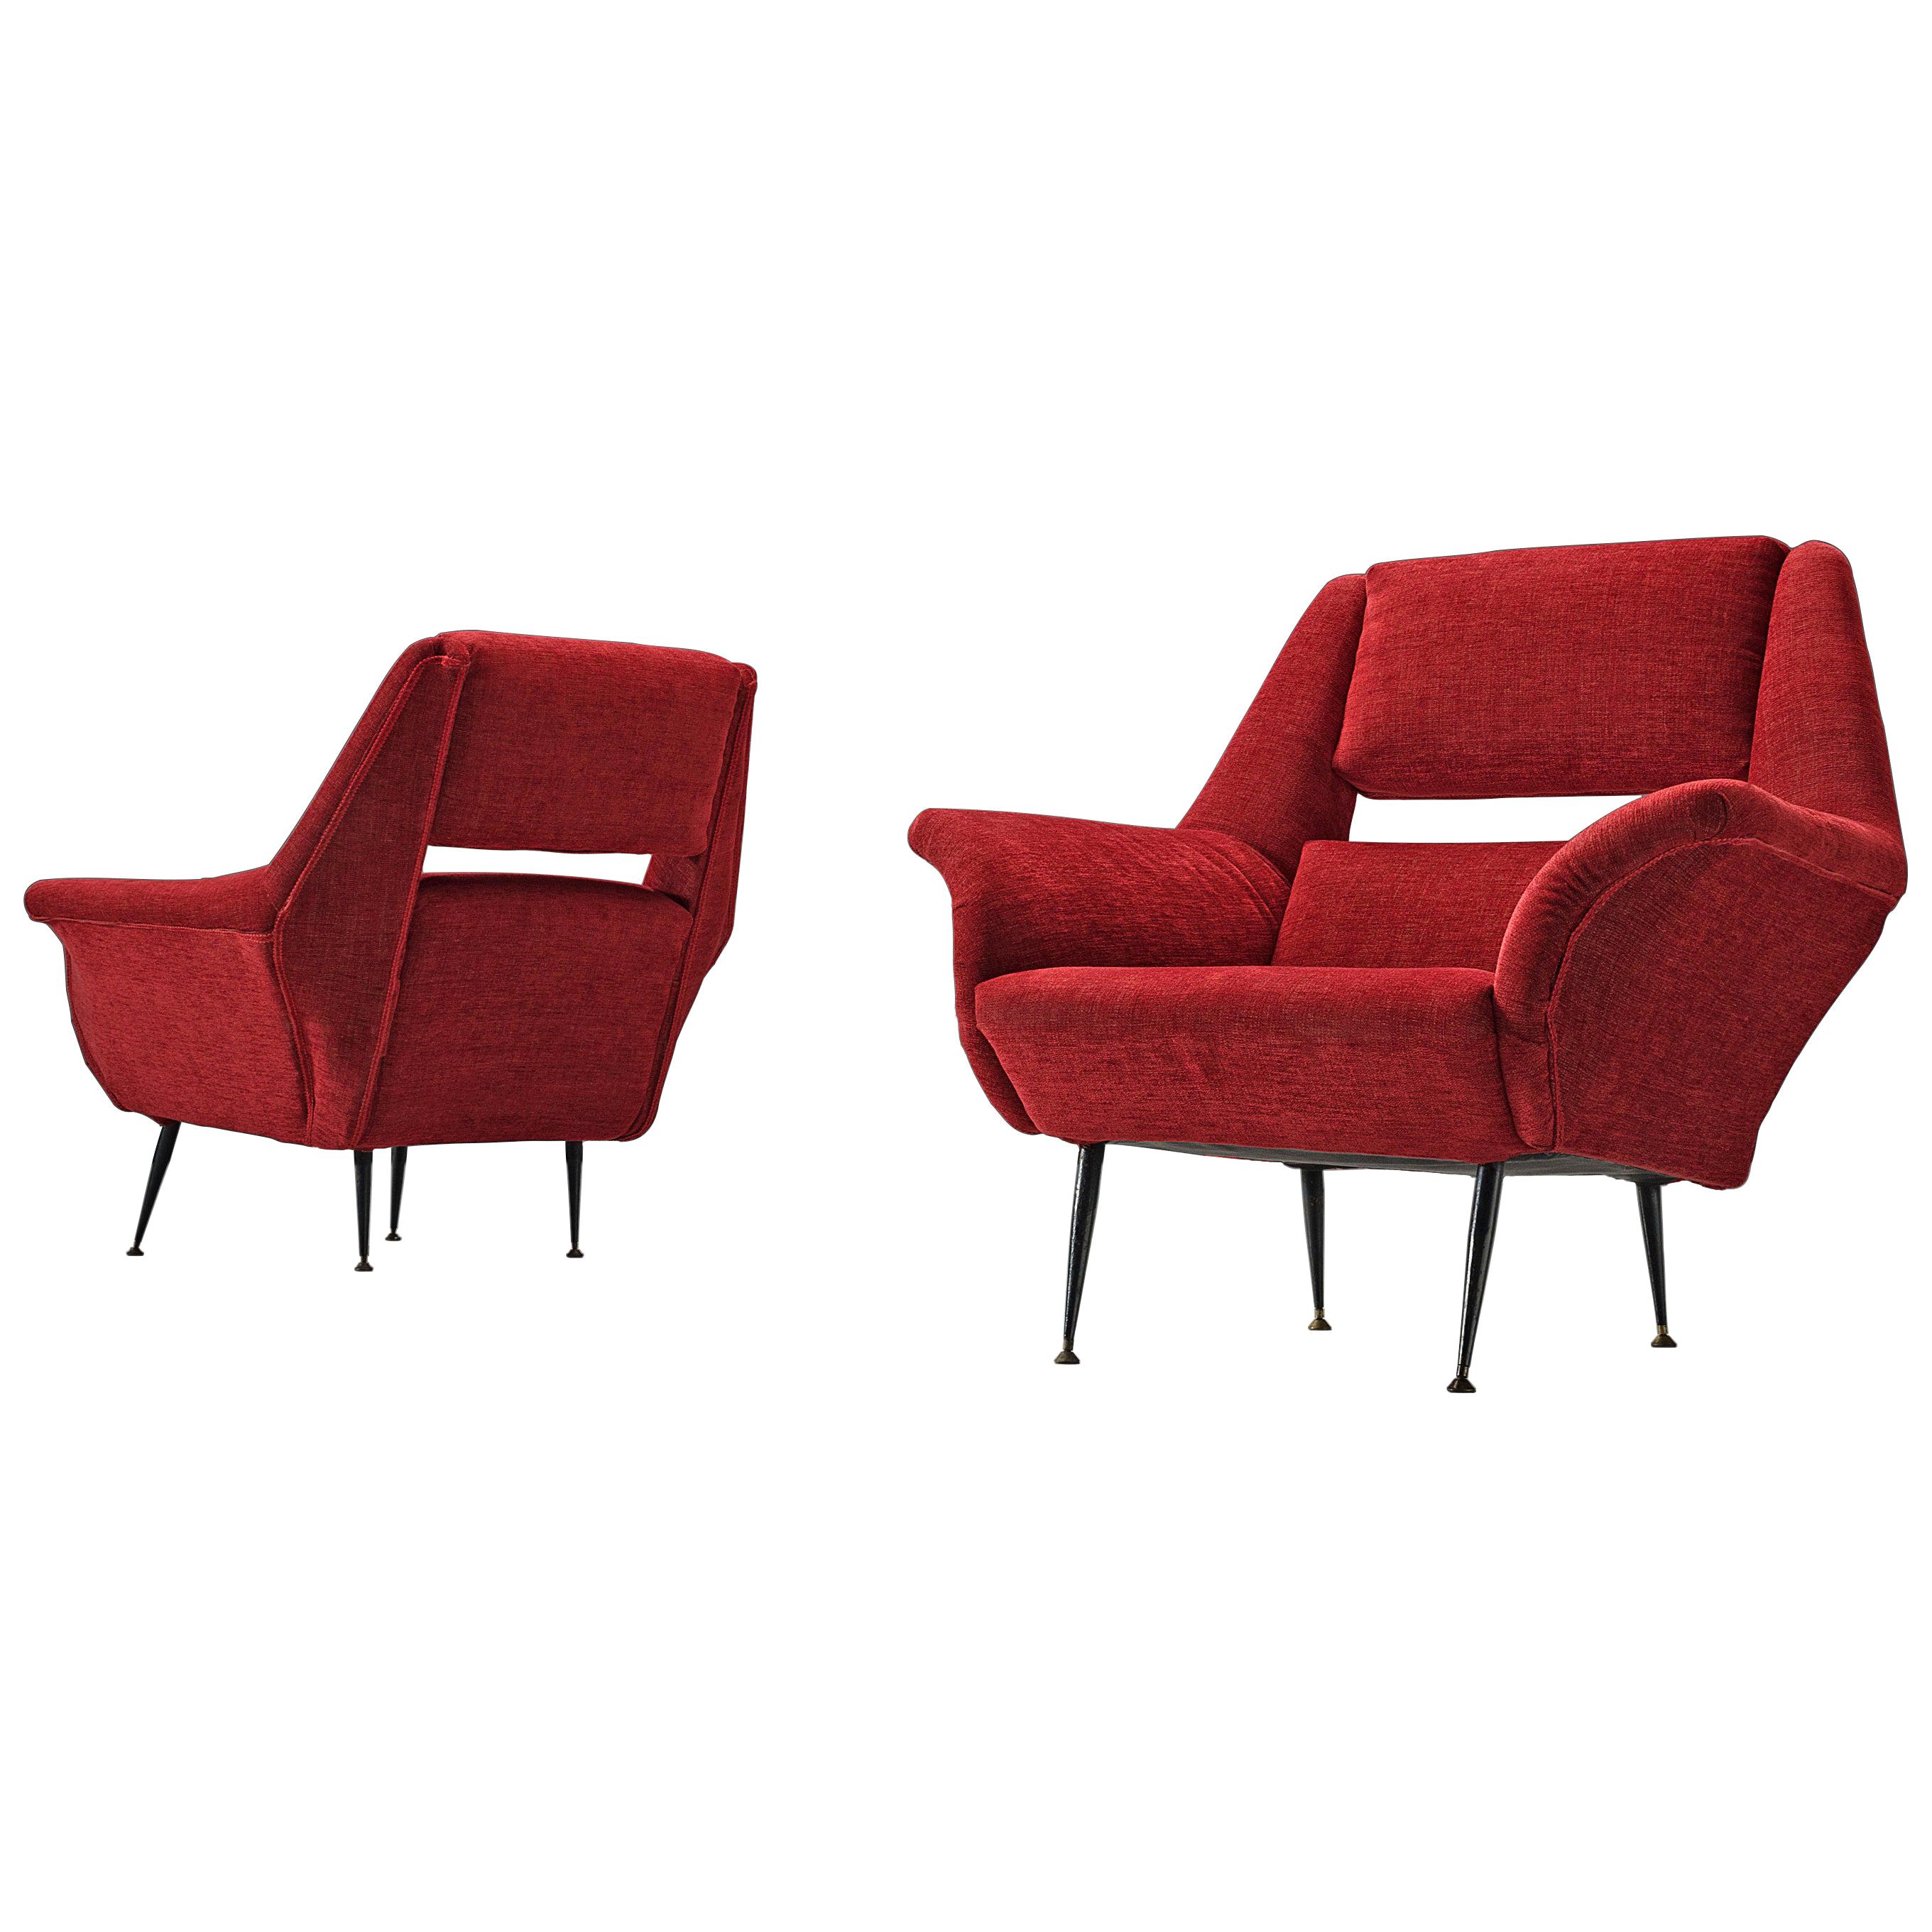 Elegant Italian Lounge Chairs in Red Upholstery